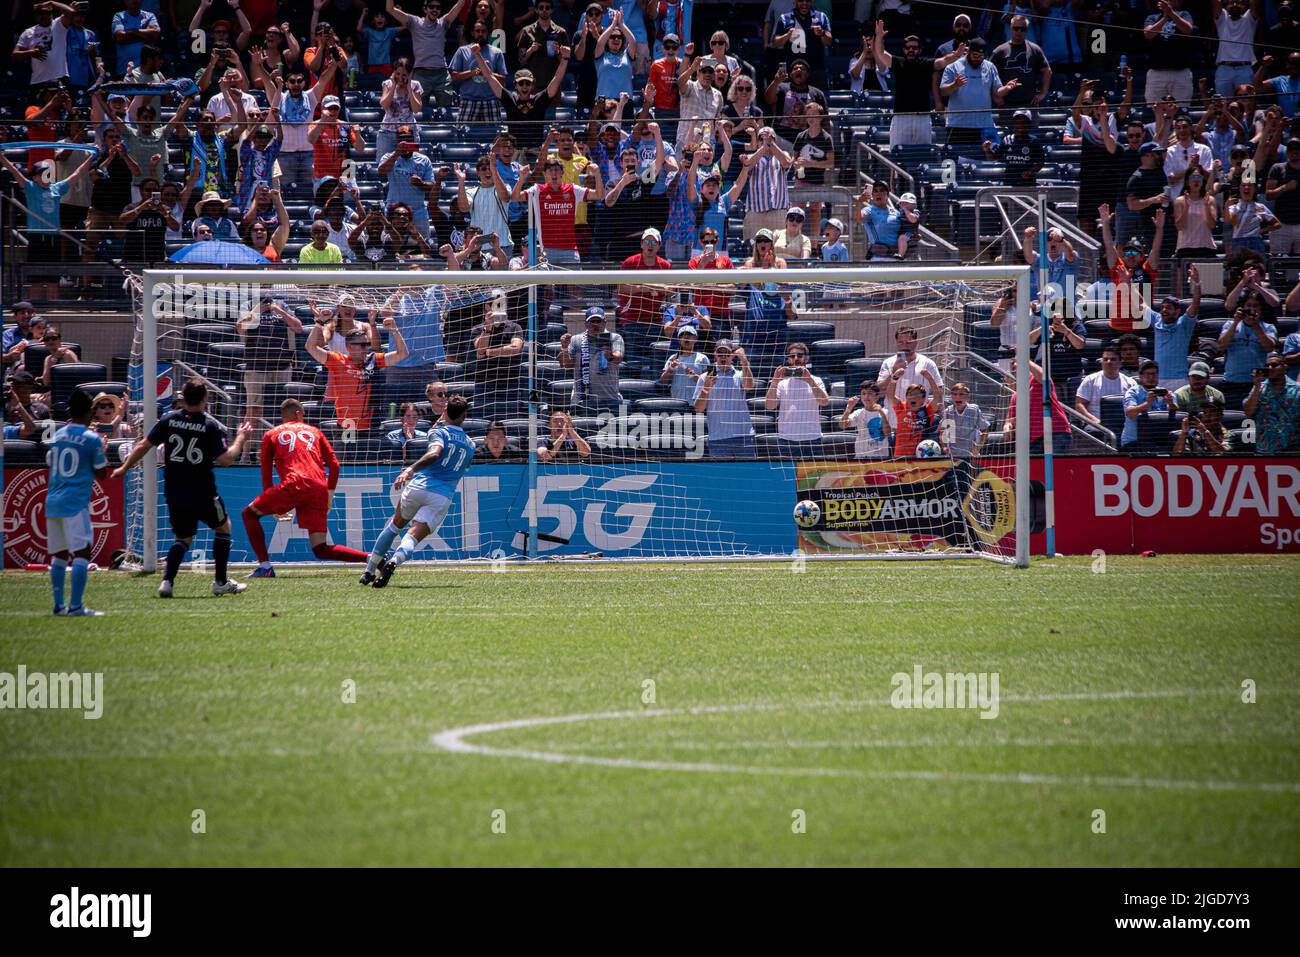 NEW YORK, NY - JULY 9: Valentin Castellanos scores from a penalty kick for the NYC FC in the first half of their match agains New England Revolutions at Yankee Stadium on July 9, 2022 in New York, NY, United States. (Photo by Matt Davies/PxImages) Credit: Px Images/Alamy Live News Stock Photo